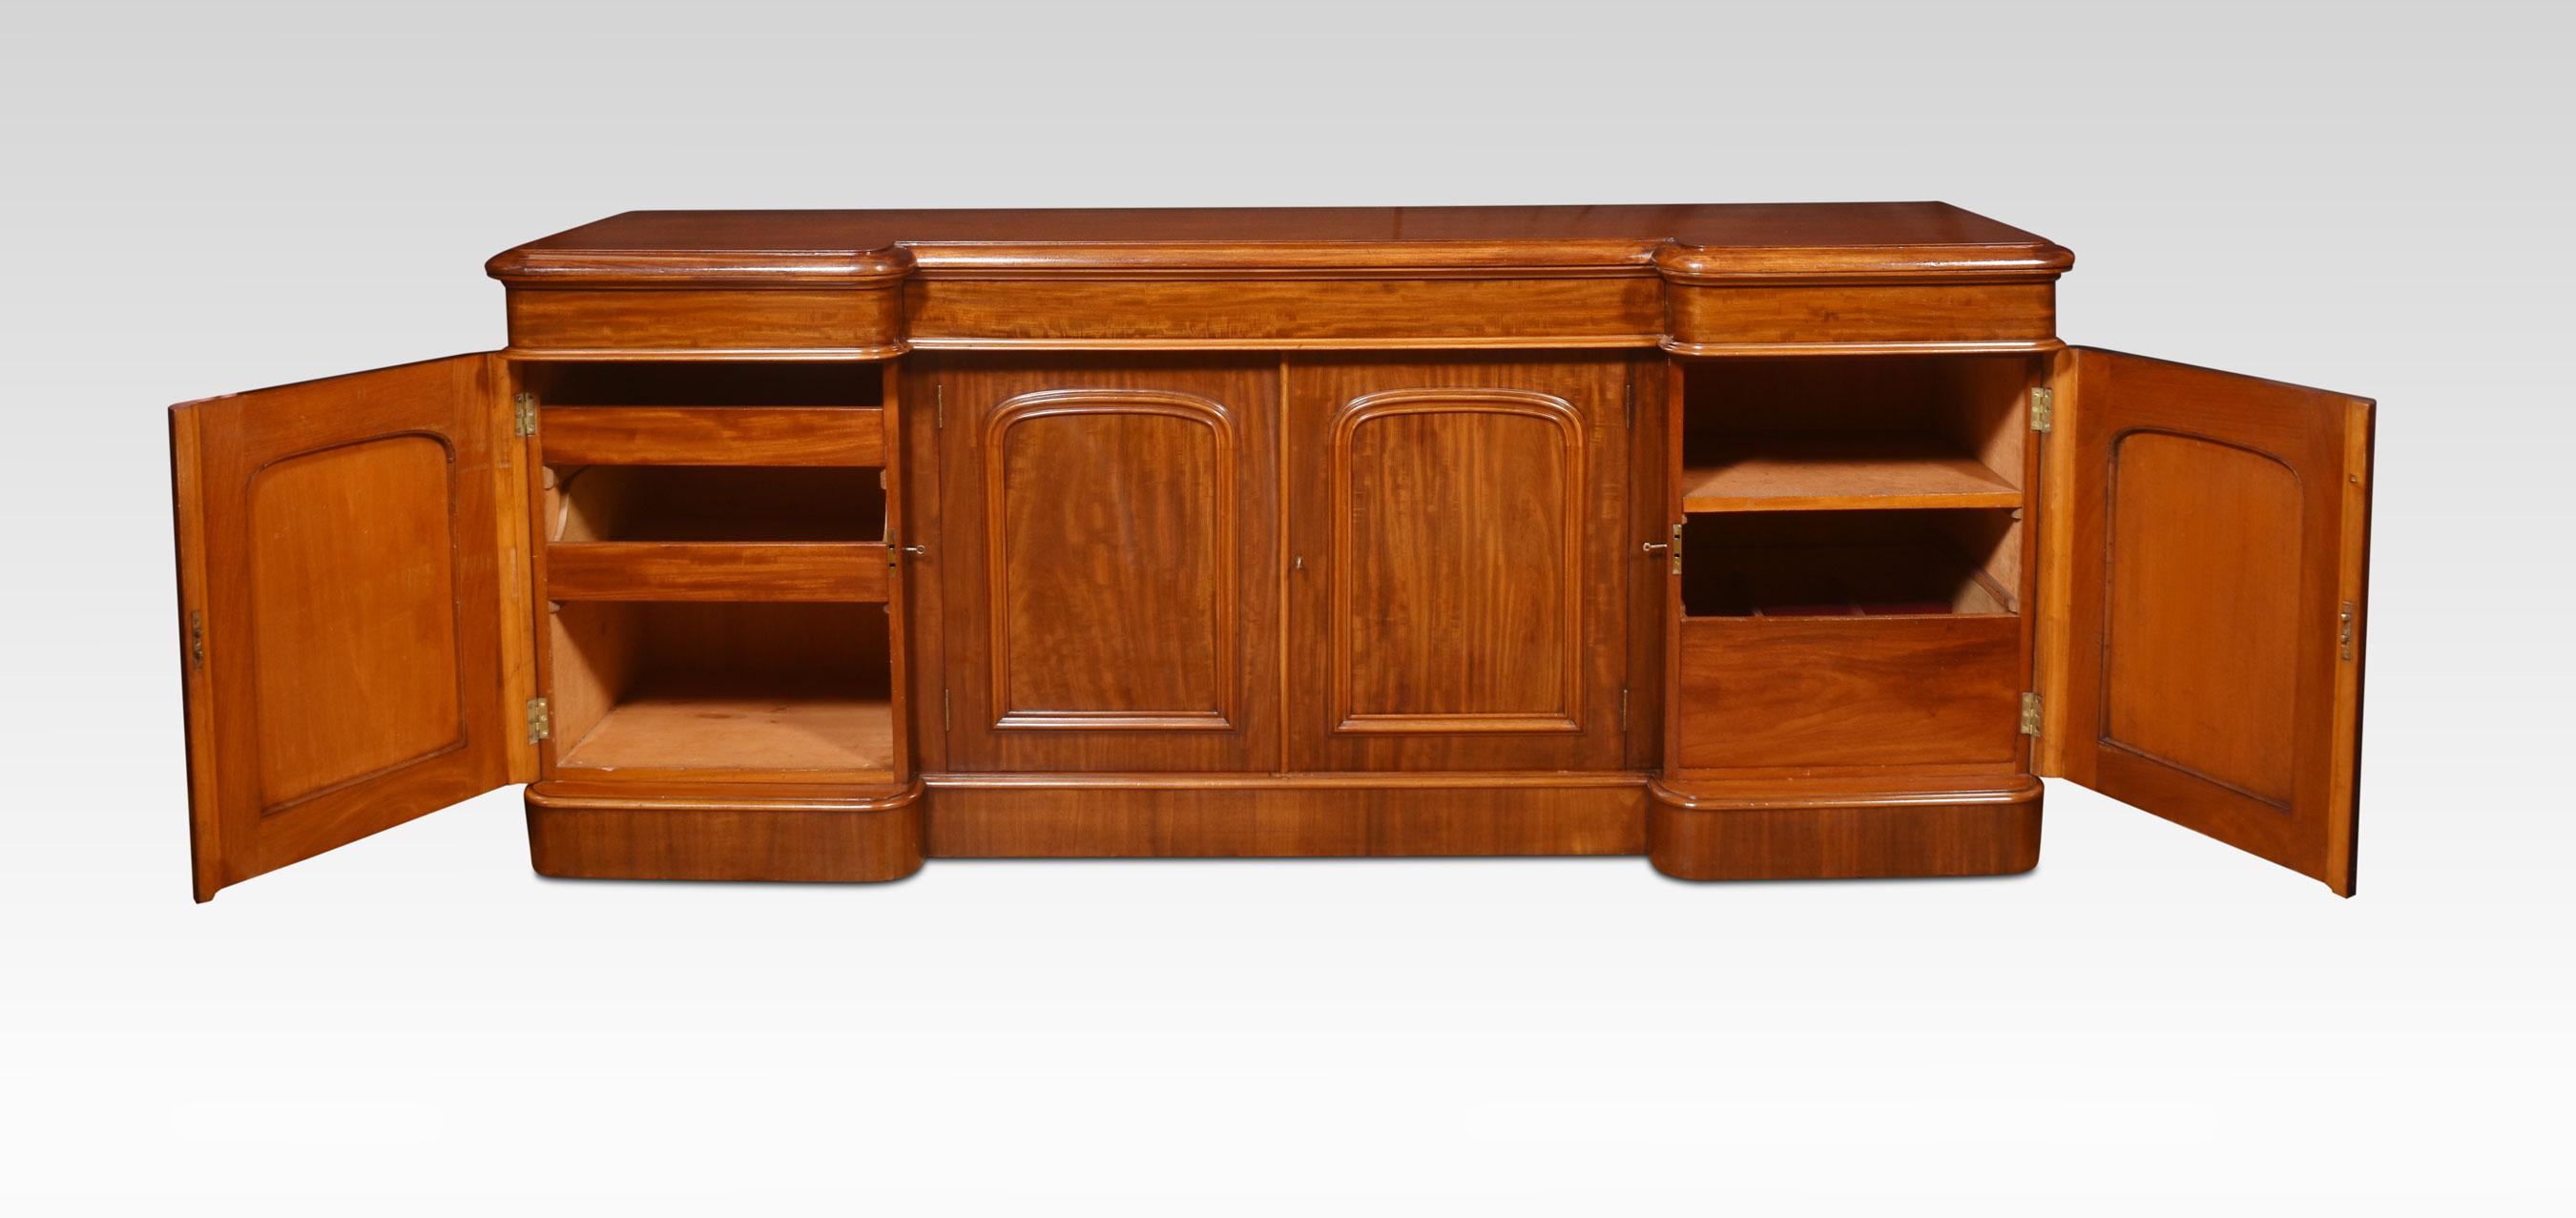 Four-door sideboard, the large rectangular mahogany top with moulded edge and three frieze drawers. Above a pair of recessed, arched and panelled figured mahogany cupboard doors. enclosing a shelf, flanked by further arched and panelled doors